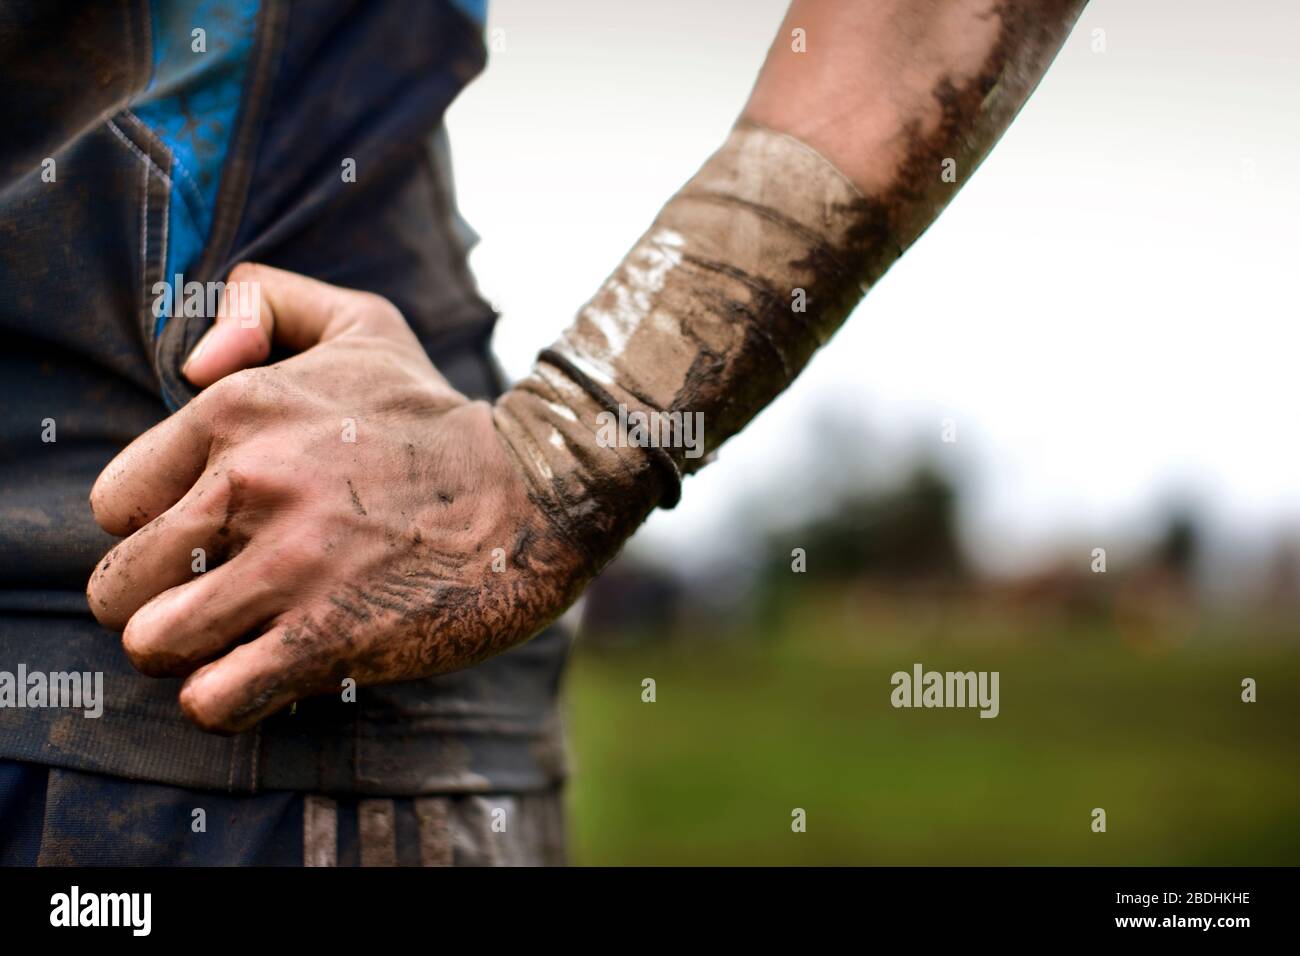 Close-up of dirty bandage on a rugby player. Stock Photo